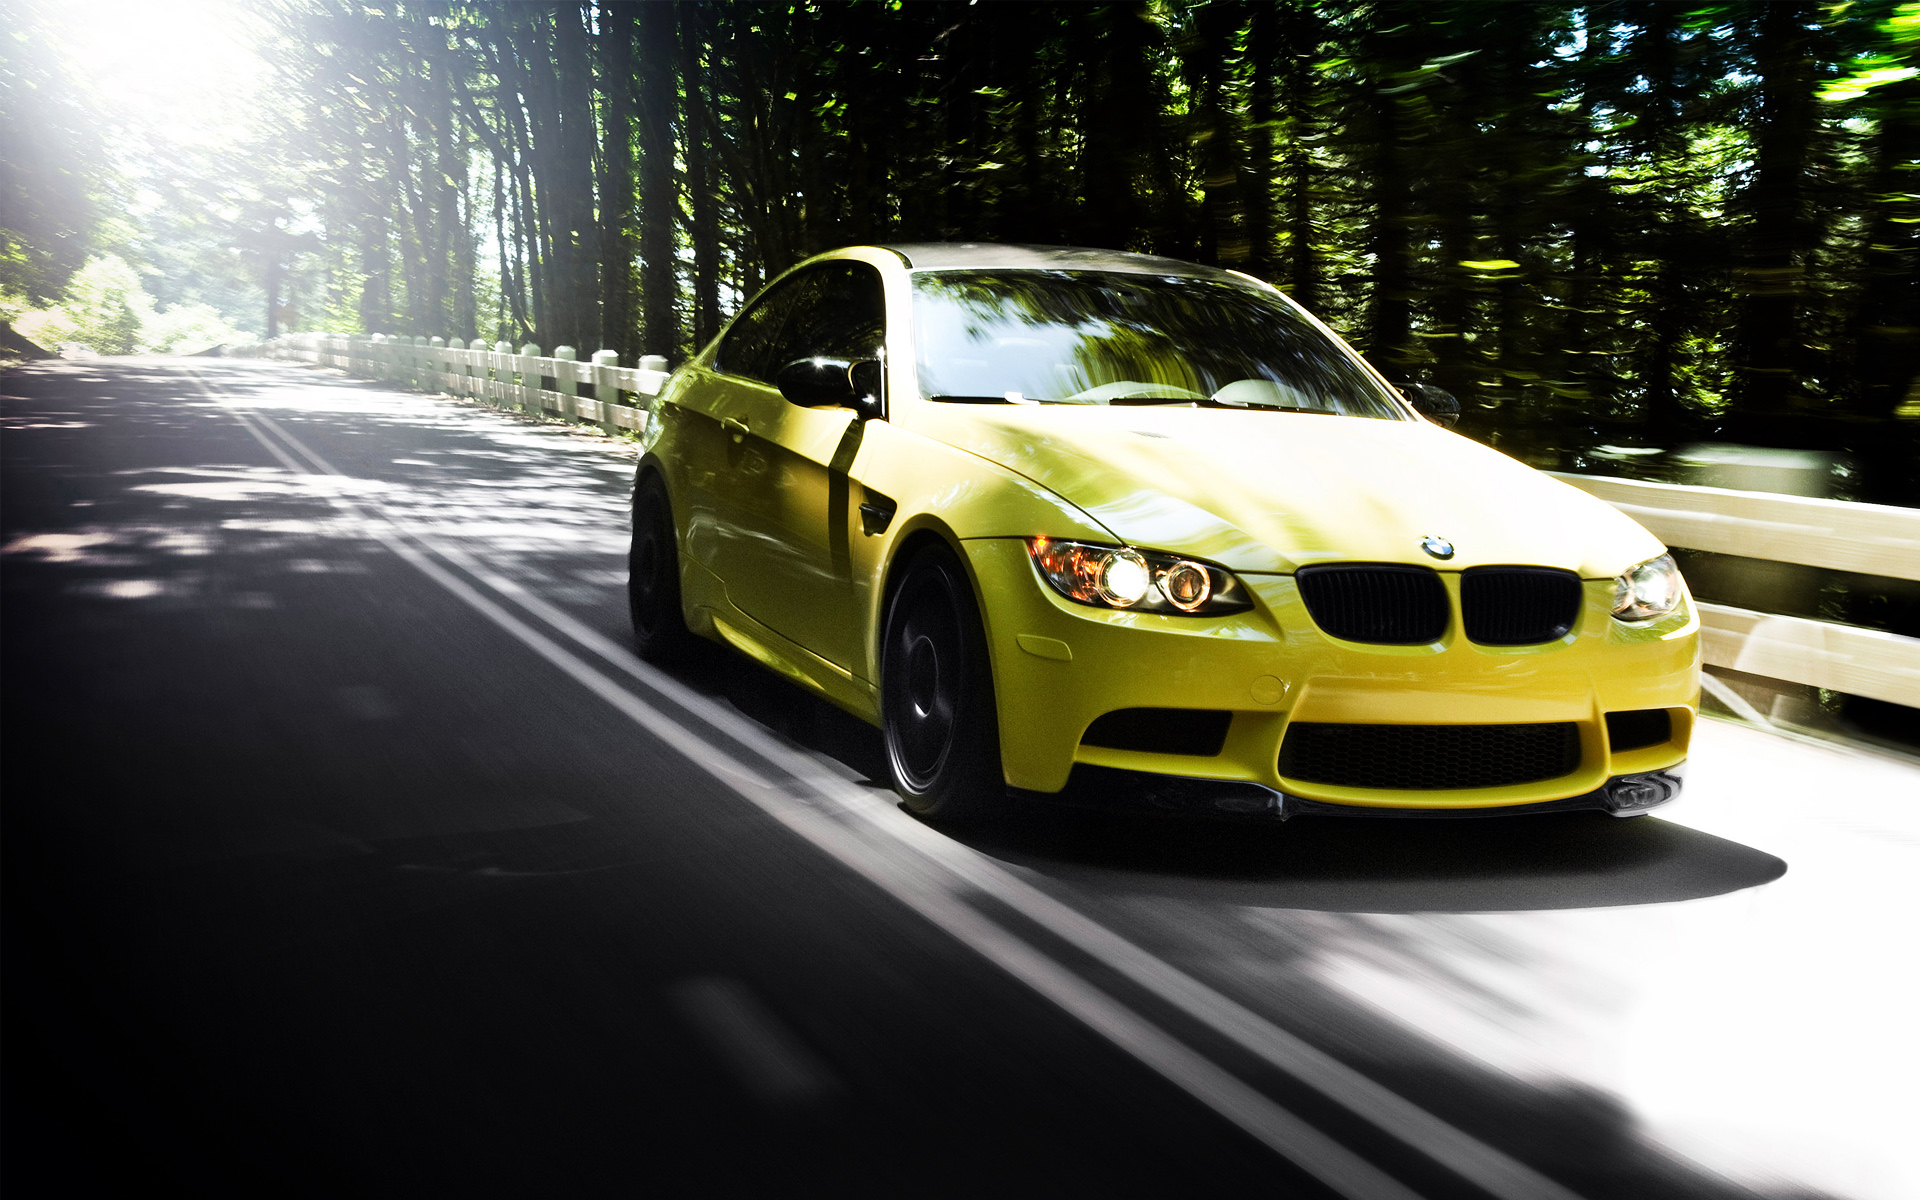 backgrounds-bmw-pictures-supercarshd-yellow-dakar-wallpapers